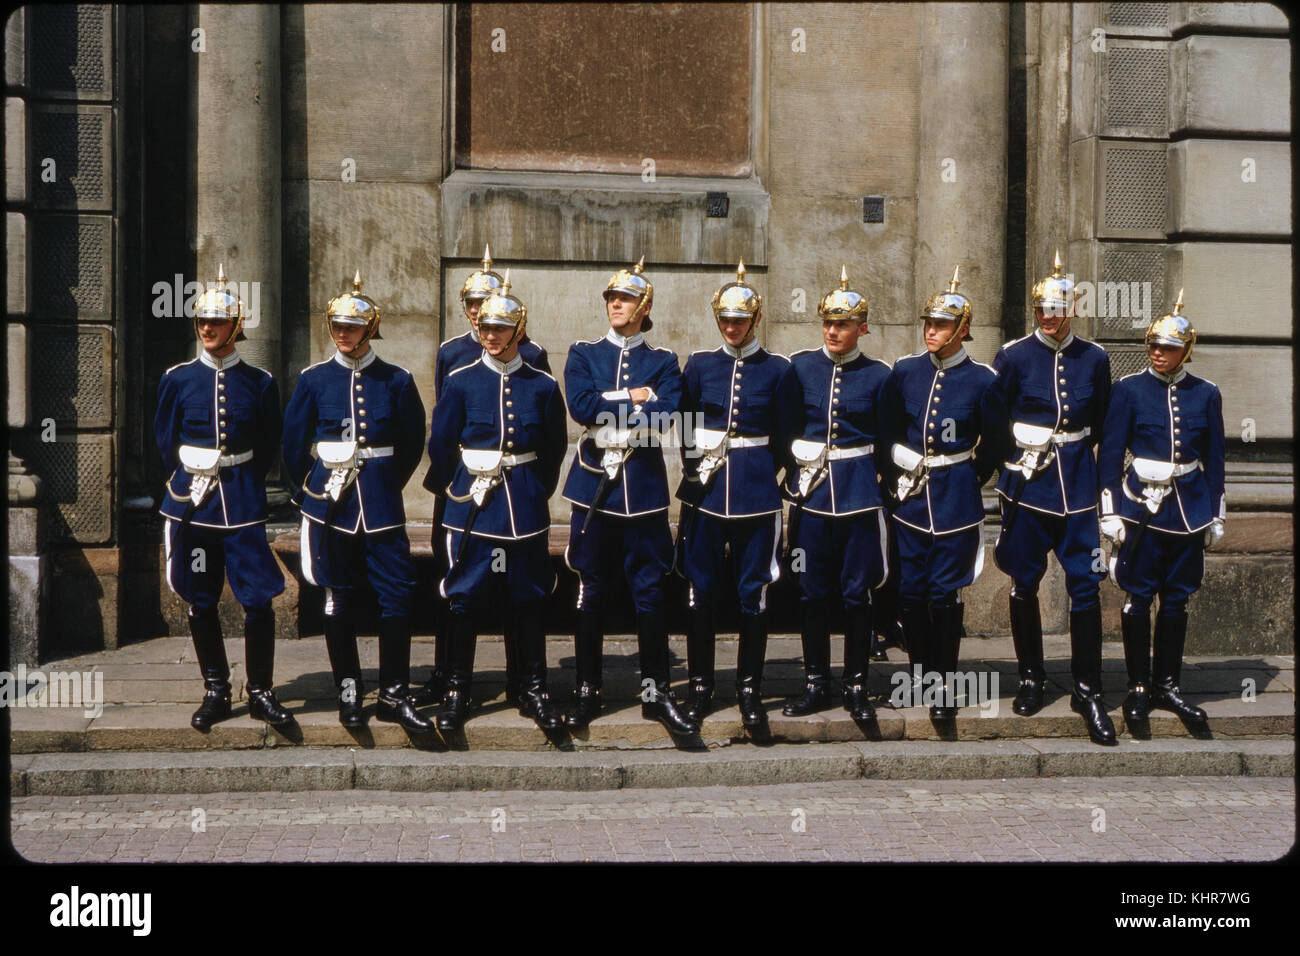 Portrait of Royal Guards at Royal Palace, Stockholm, Sweden, 1966 Stock Photo